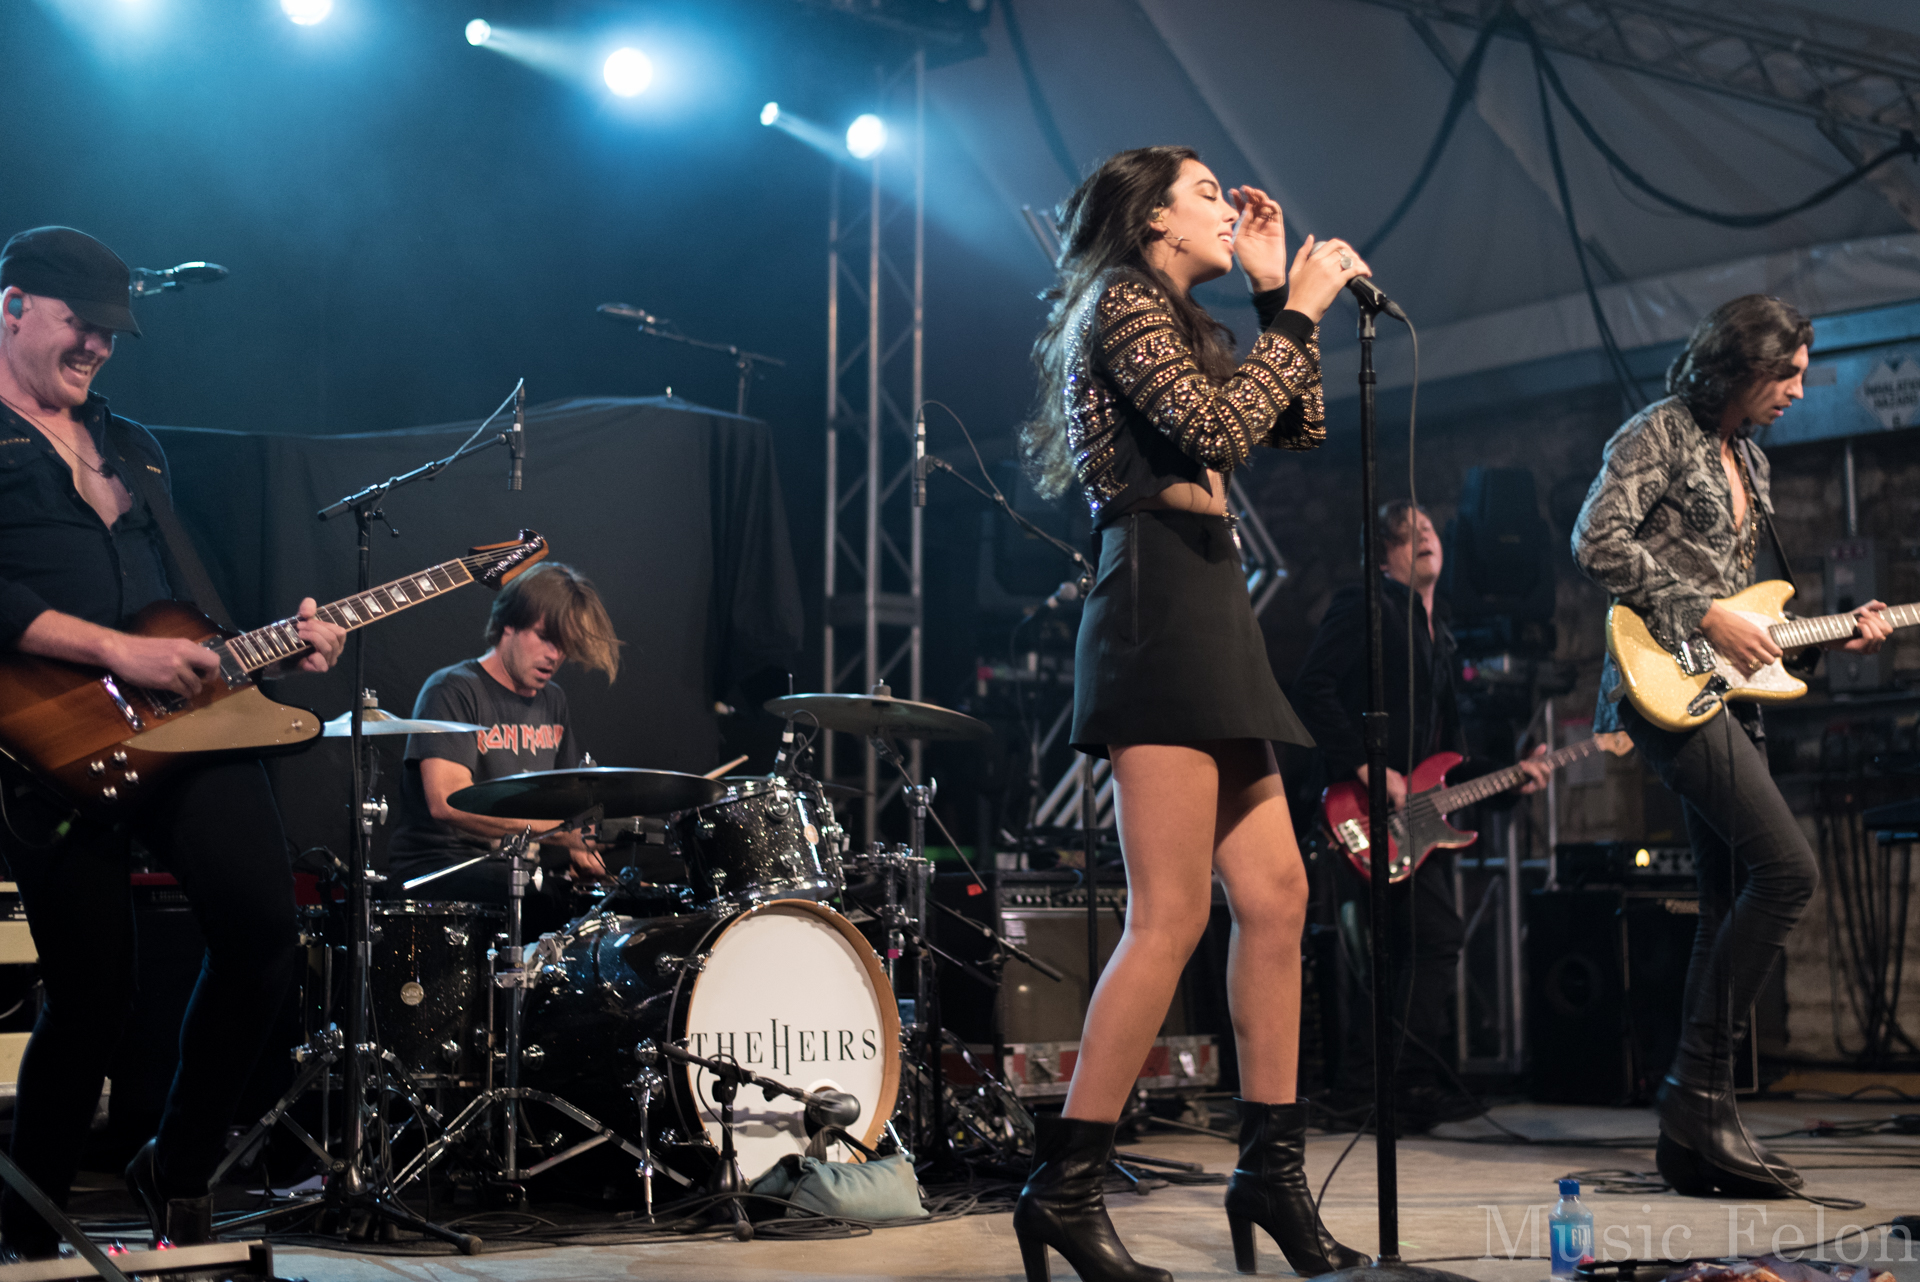 The Heirs, 10/2/2015, Stubb’s, ACL Late Nights, Austin: Photos – Write-up